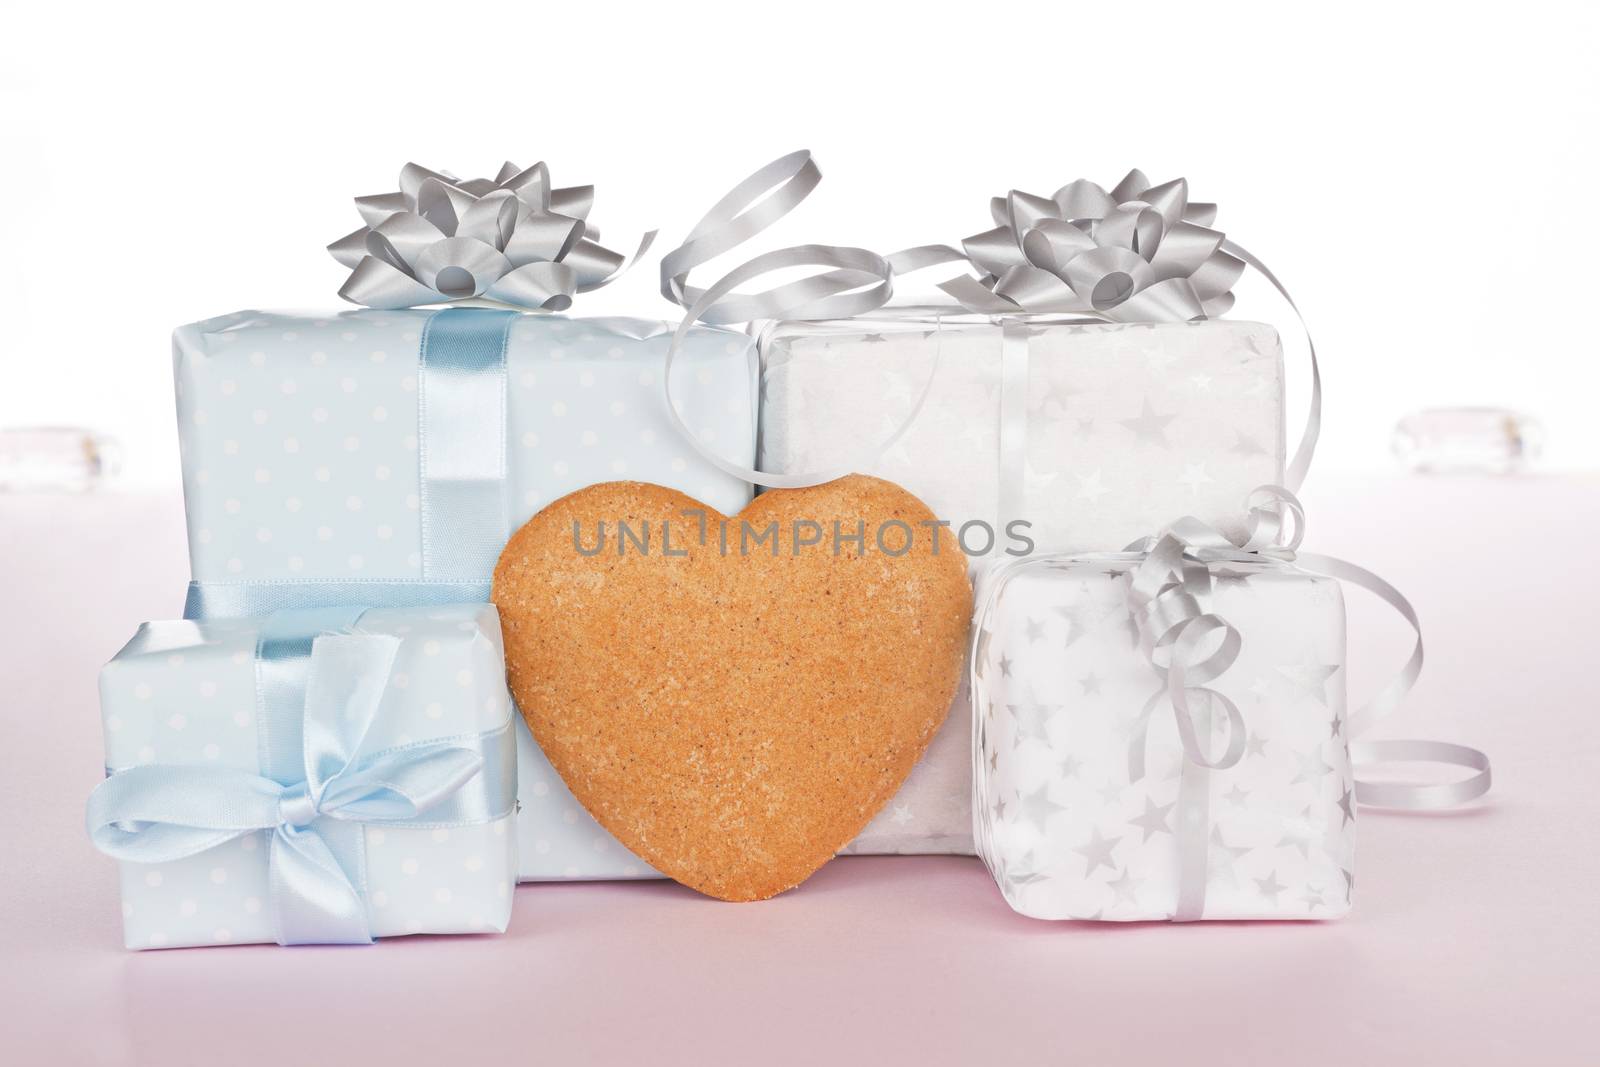 Big and small christmas presents with heart shaped gingerbread for your text. Festive xmas concept.